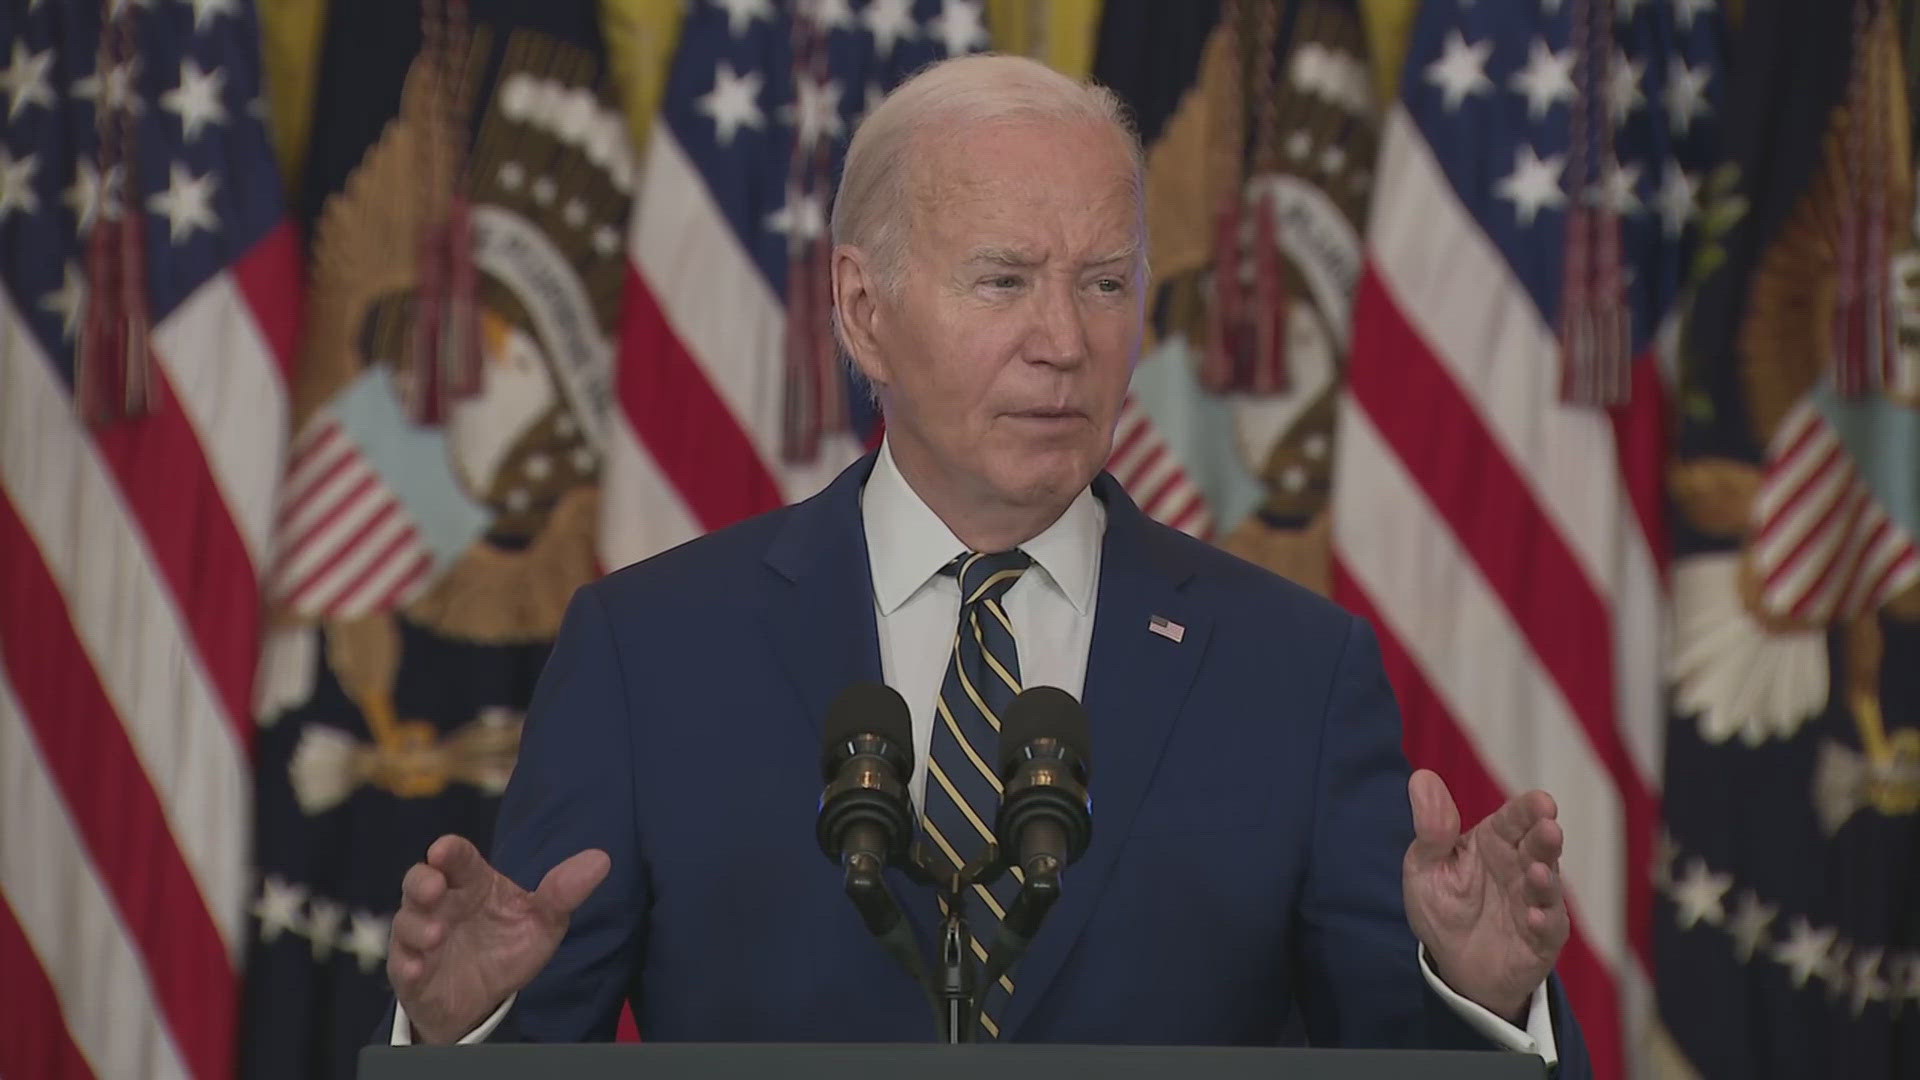 Biden has contemplated unilateral action for months, especially after Republican lawmakers rejected a bipartisan security deal at the behest of Donald Trump.